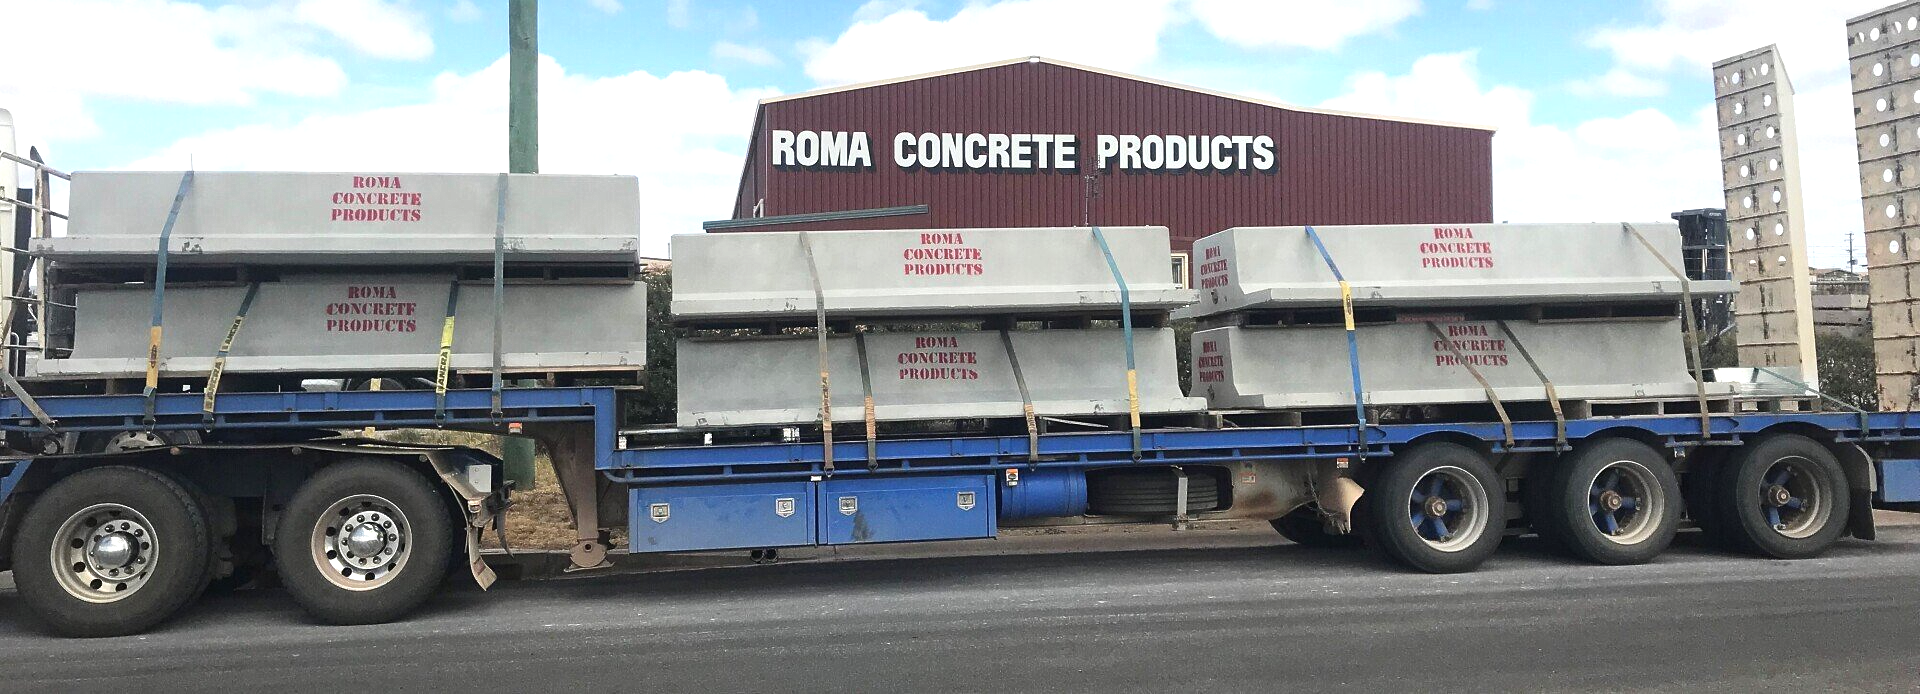 Concrete troughs on a truck for delivery